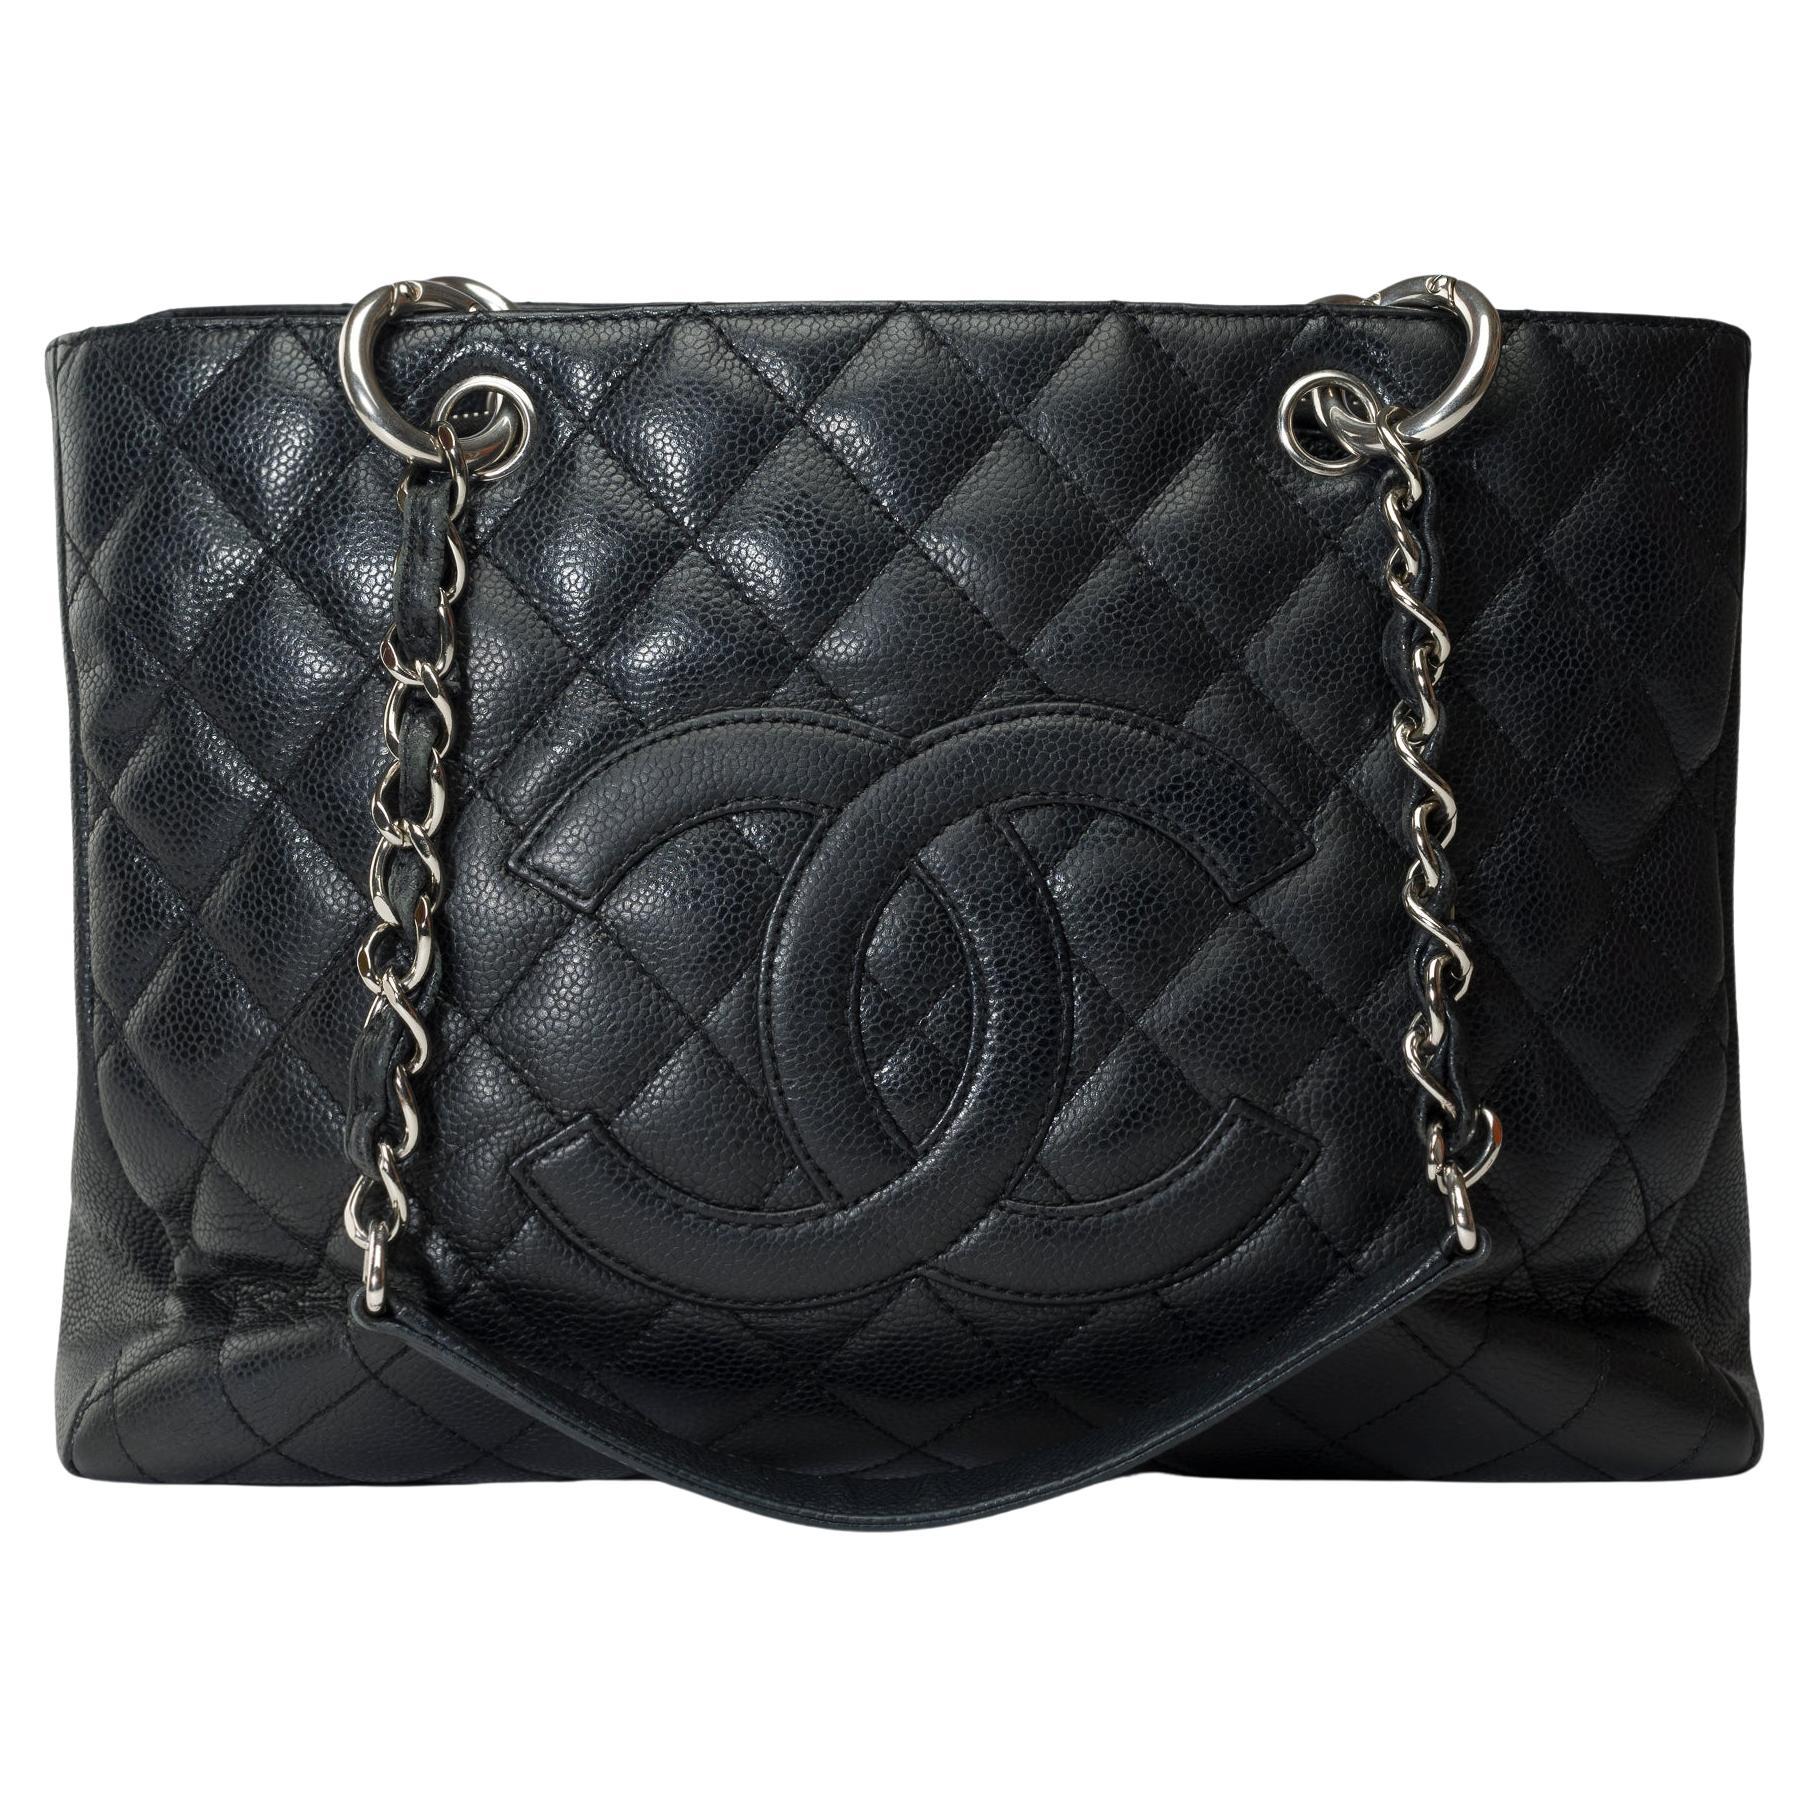  Chanel Grand Shopping Tote bag (GST) in black Caviar quilted leather, SHW For Sale